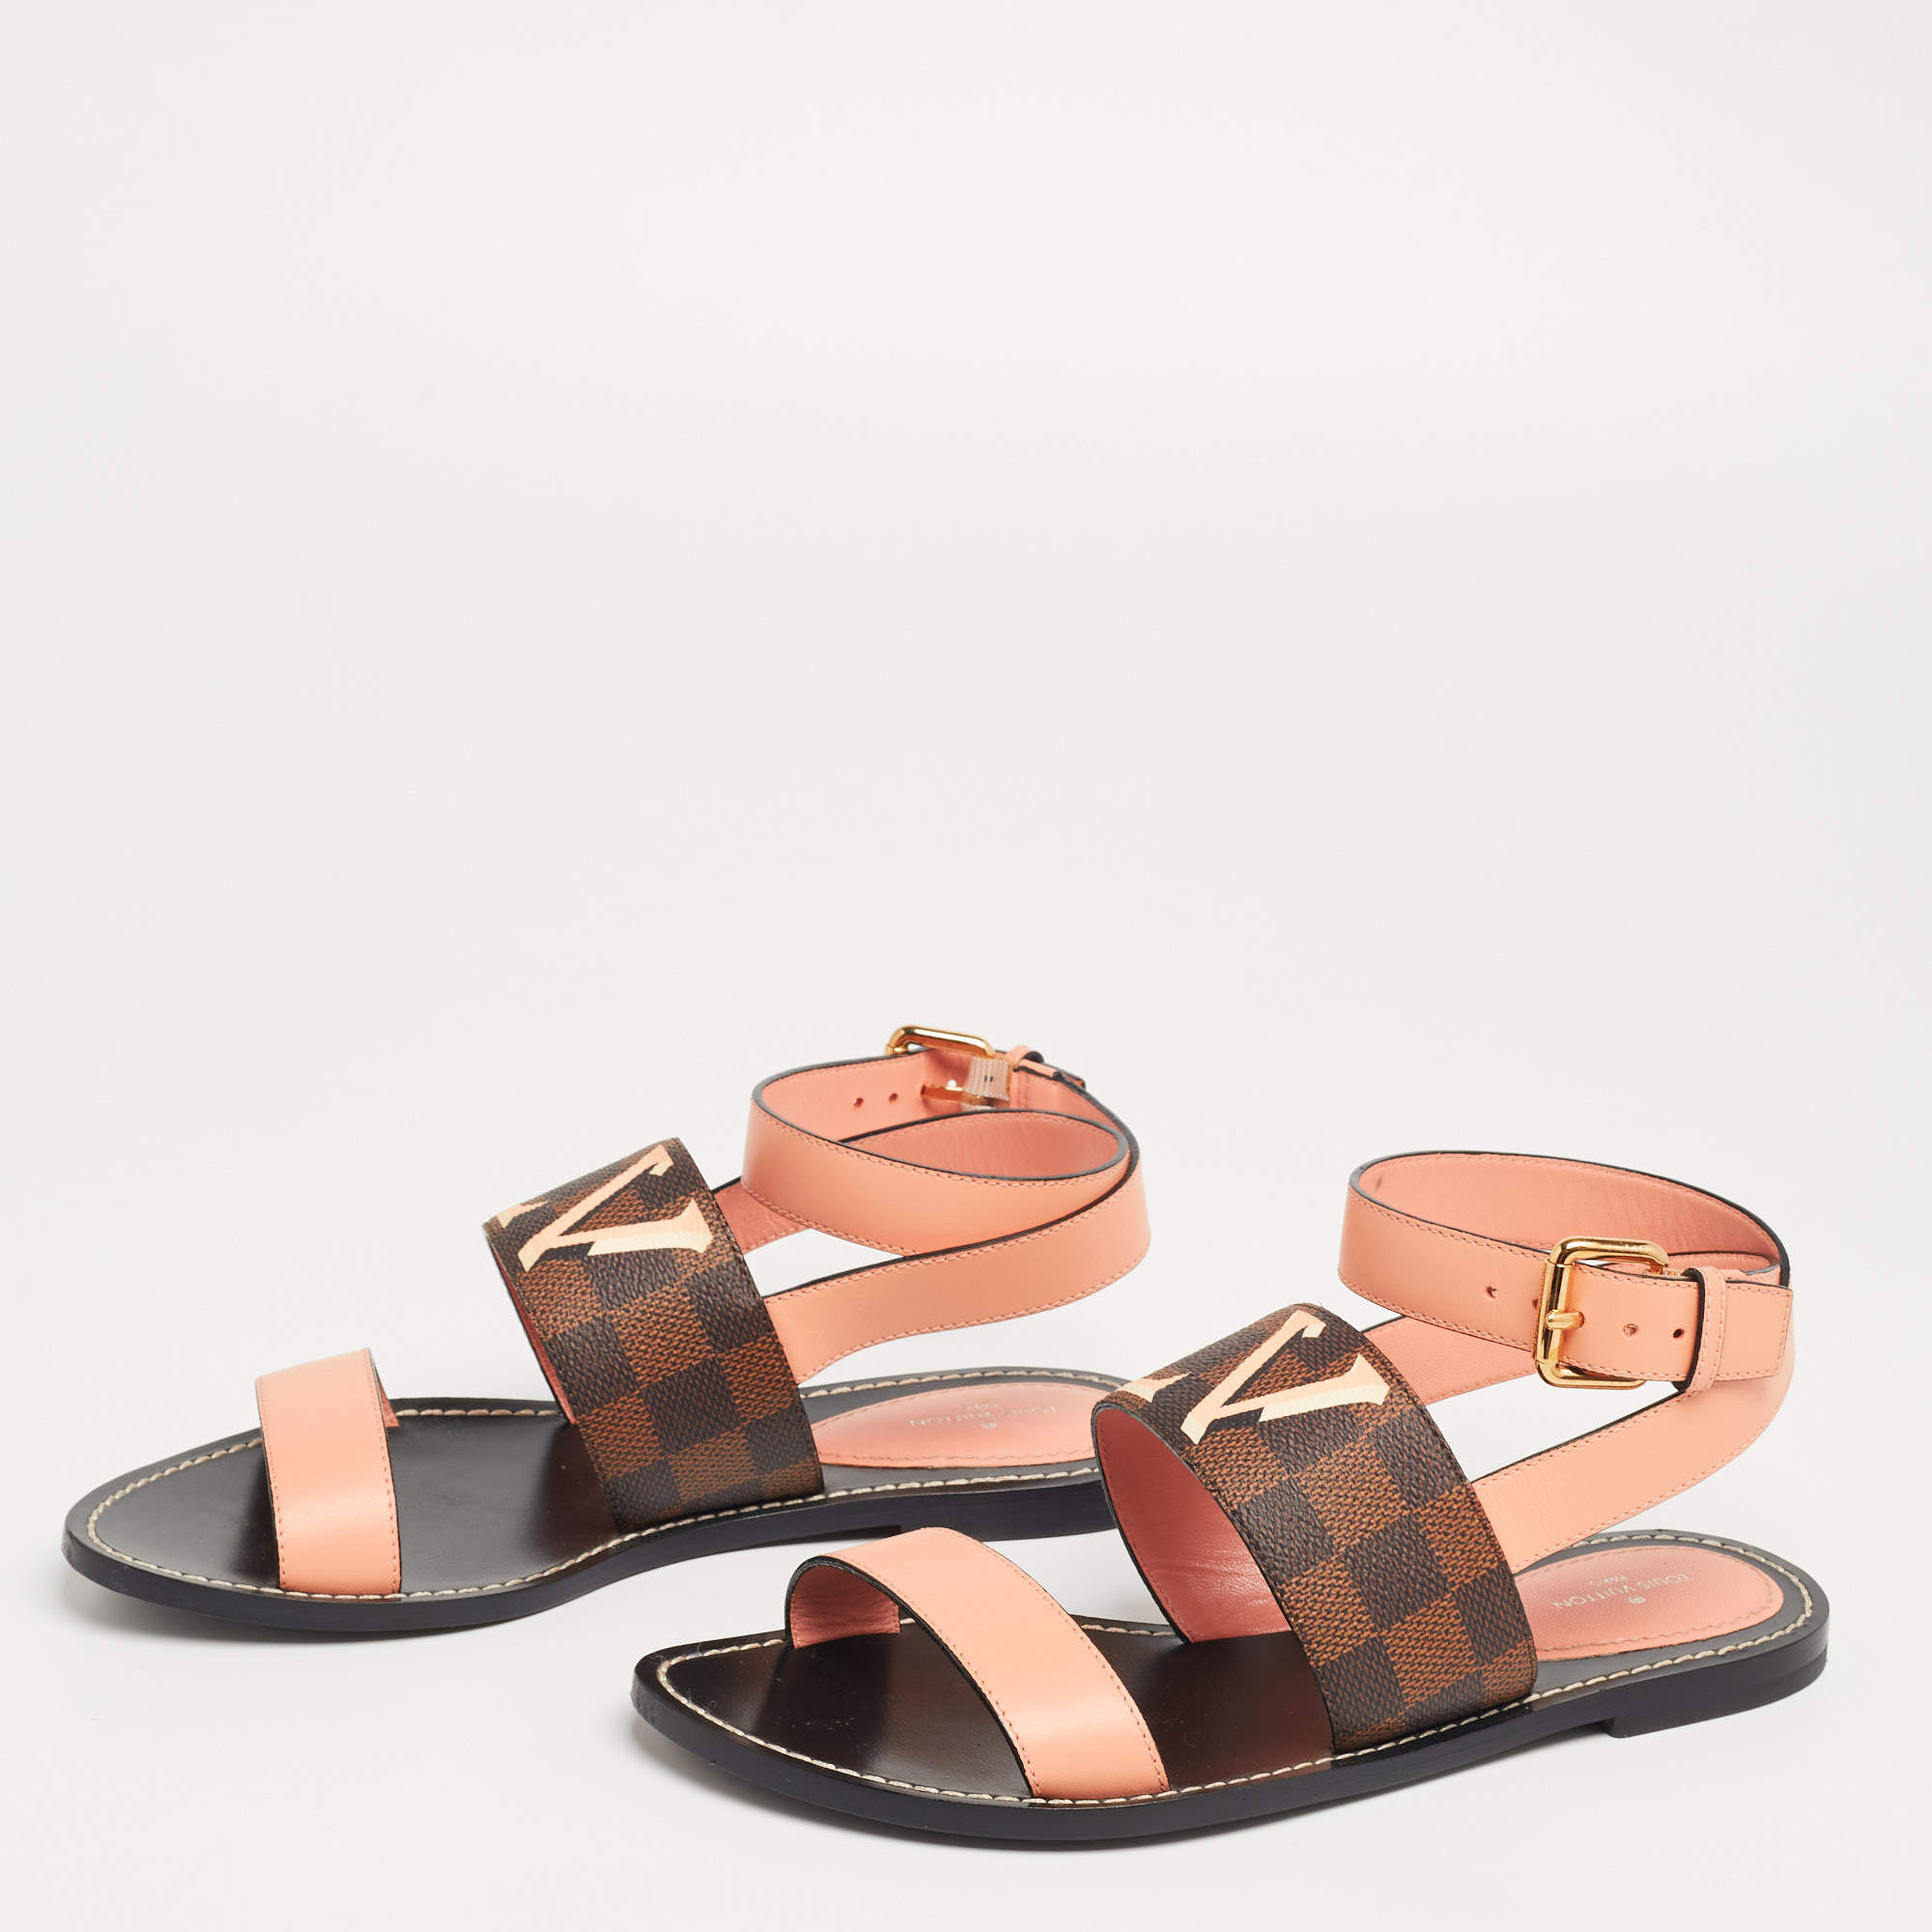 LOUIS VUITTON brown leather and monogram PASSENGER Flat Sandals